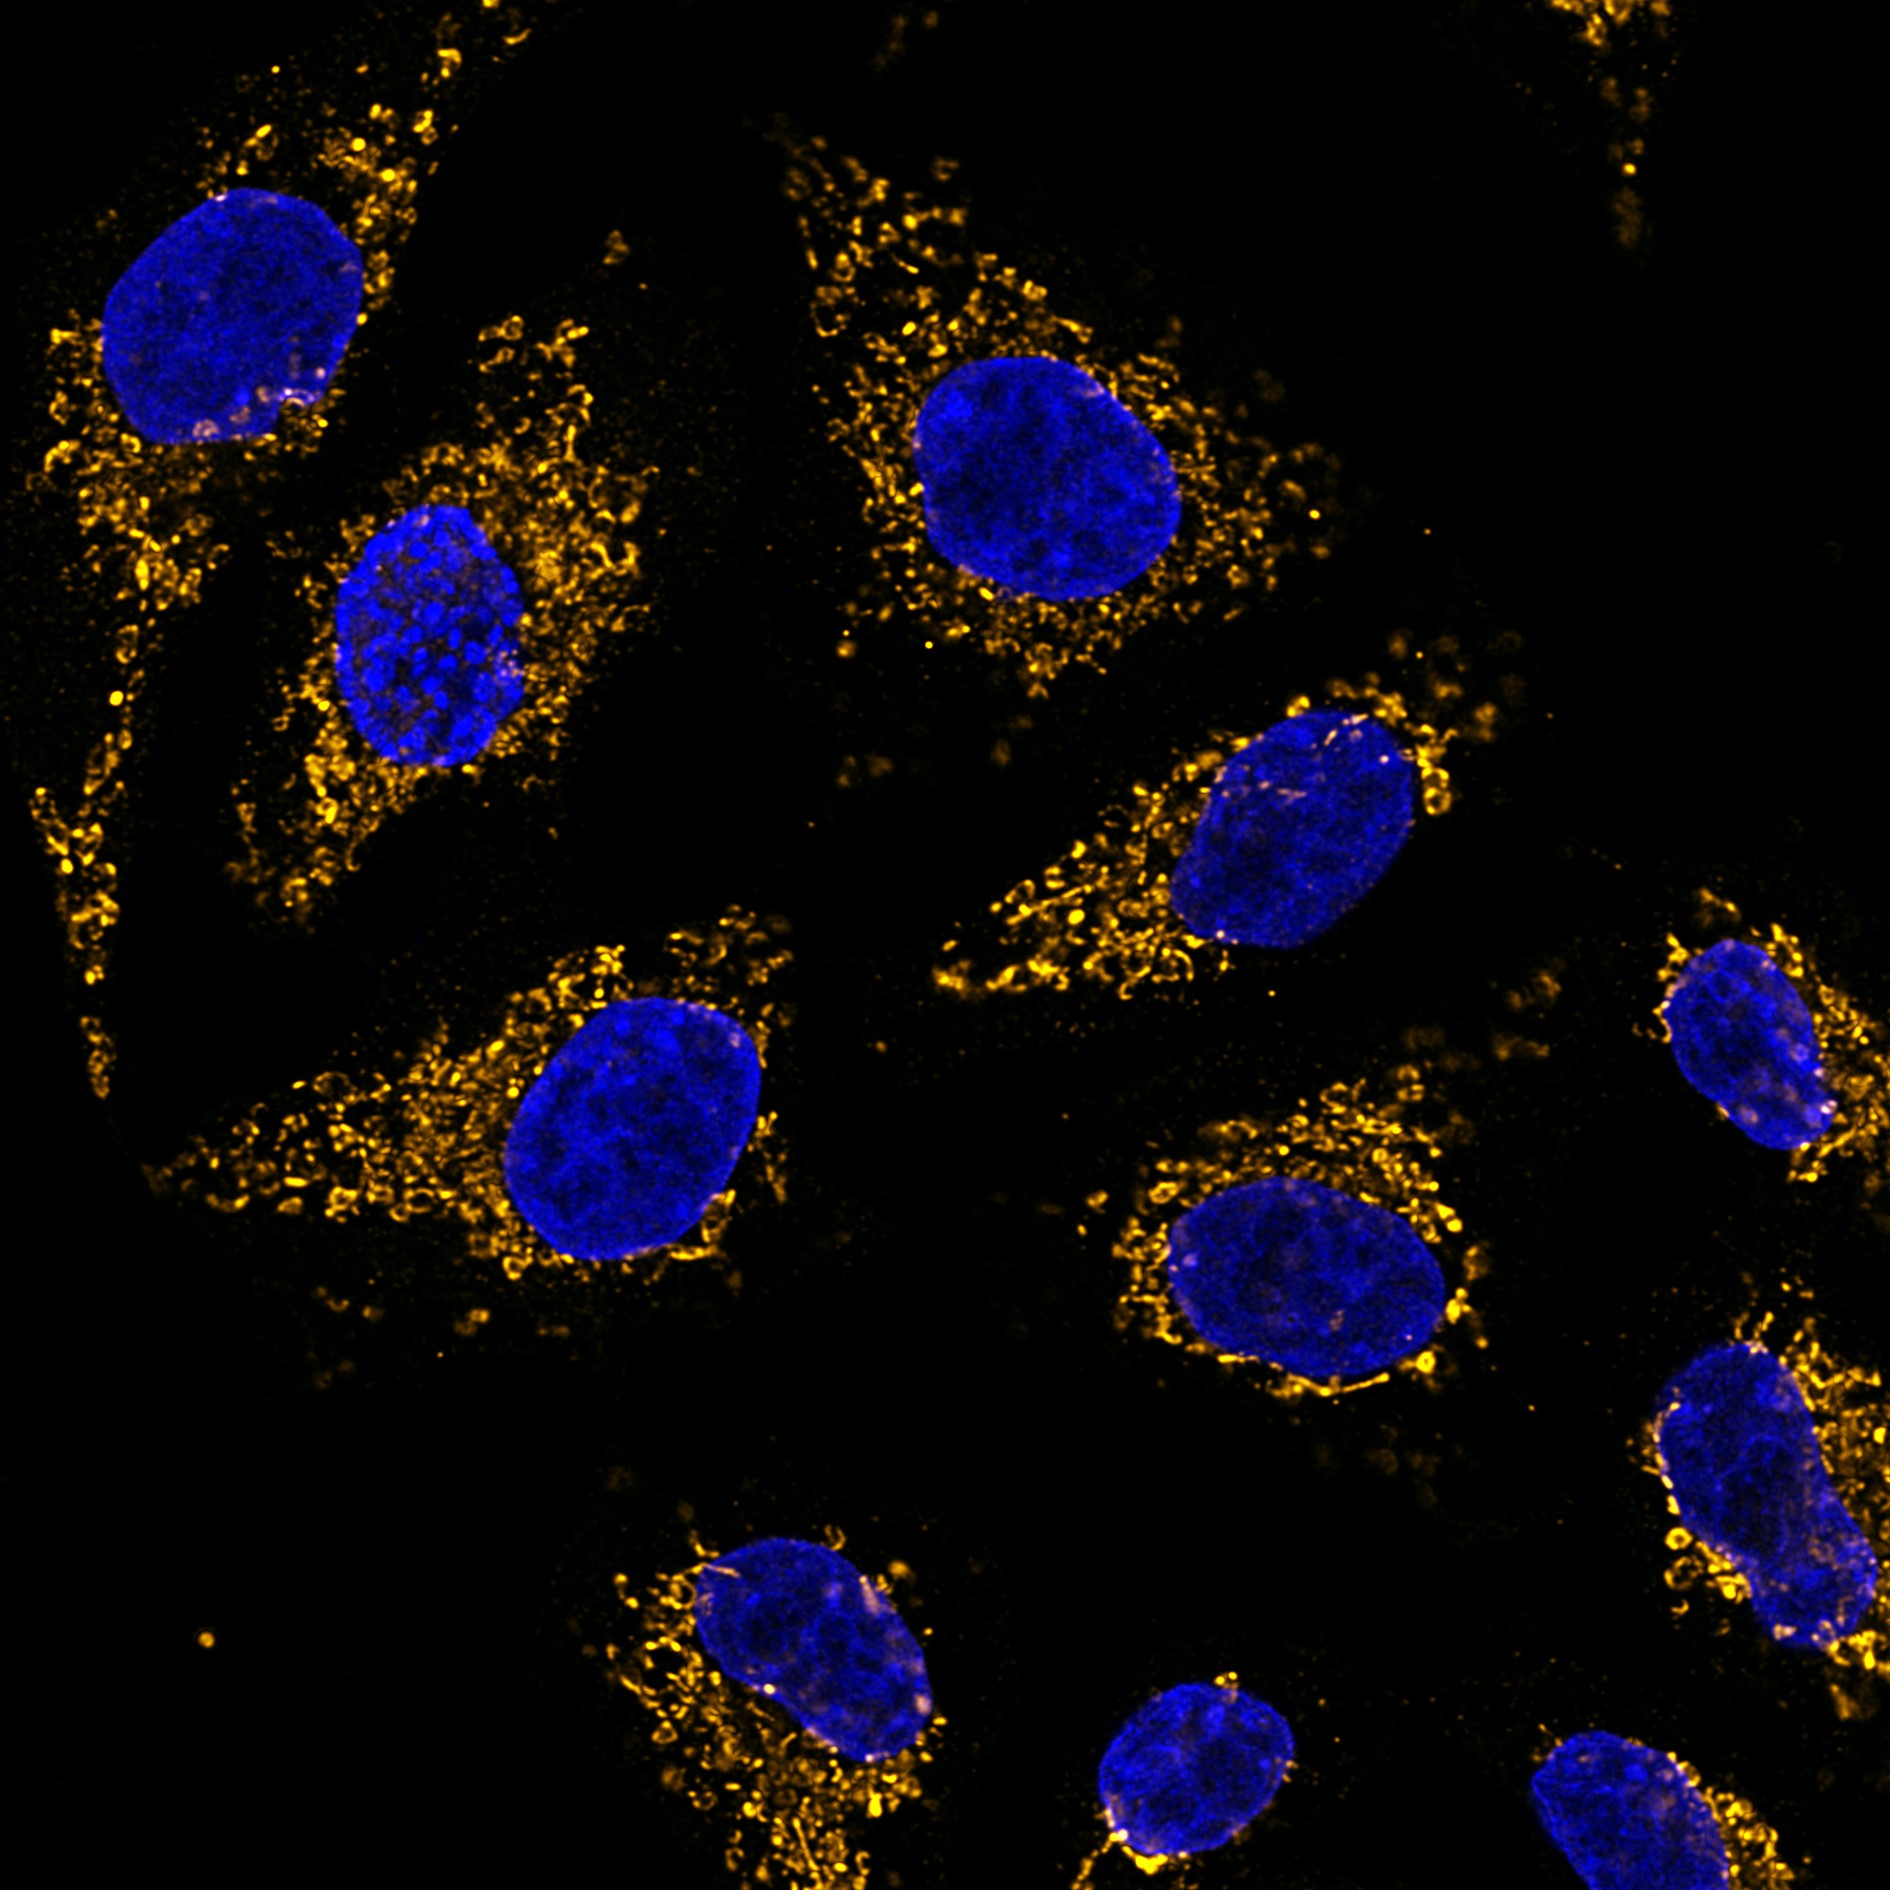 Immunofluorescence analysis of HeLa cells stained with mouse IgG1 anti-HSP60 antibody (66041-1-Ig) and Nano-Secondary® alpaca anti-mouse IgG1, recombinant VHH, CoraLite® Plus 555 (smsG1CL555-1, orange). Nuclei were stained with DAPI (blue). Images were recorded at the Core Facility Bioimaging at the Biomedical Center, LMU Munich.